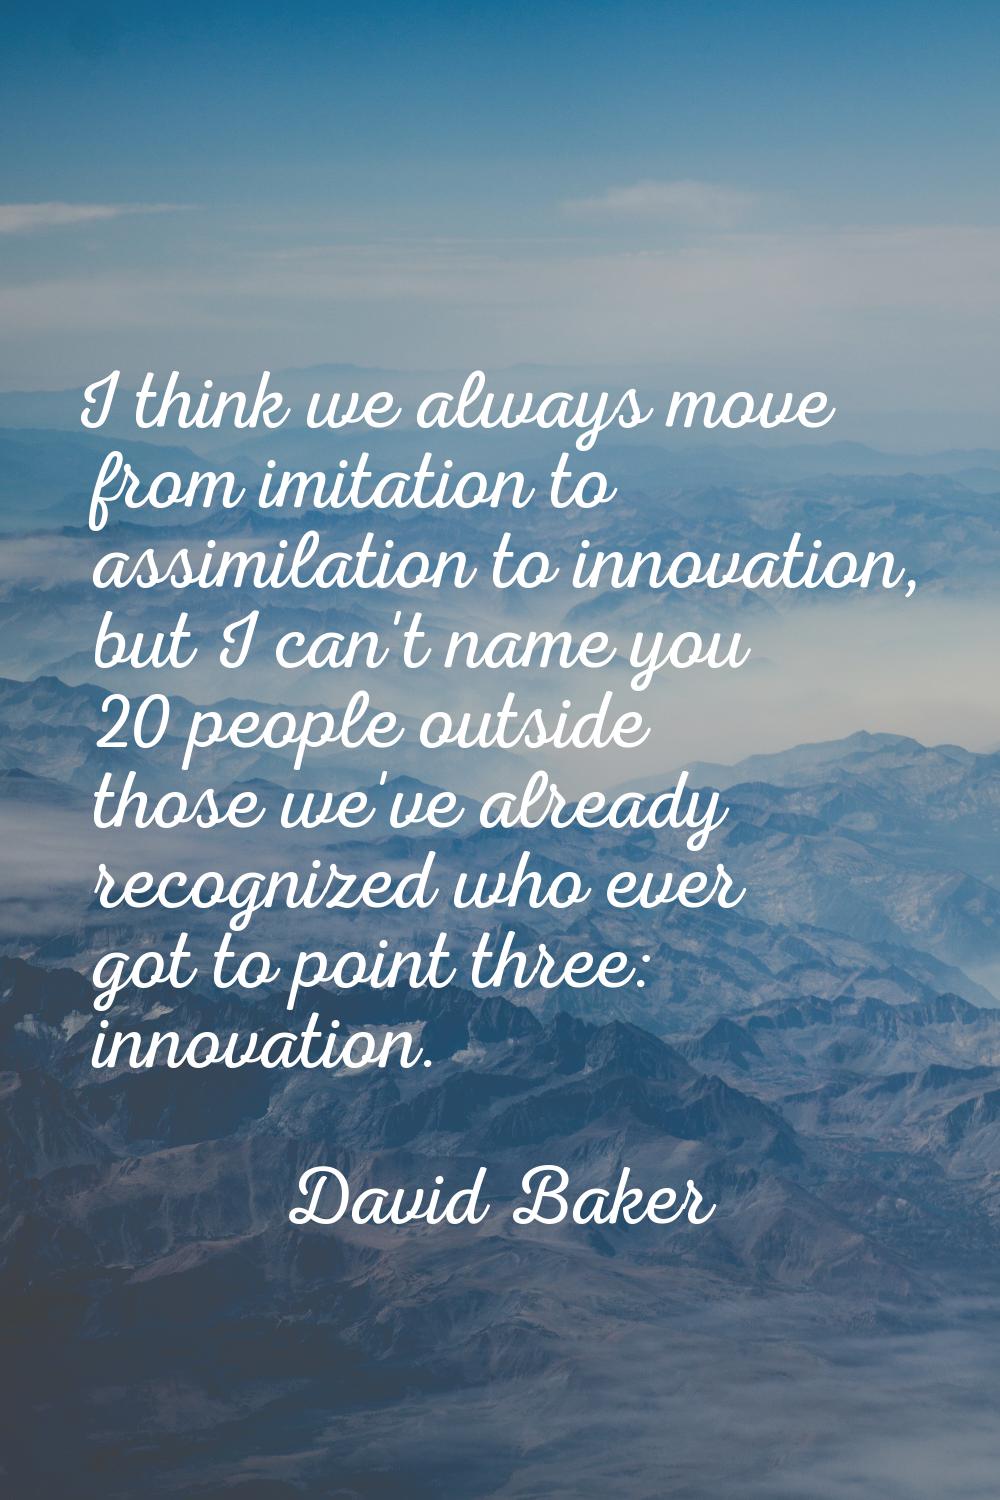 I think we always move from imitation to assimilation to innovation, but I can't name you 20 people